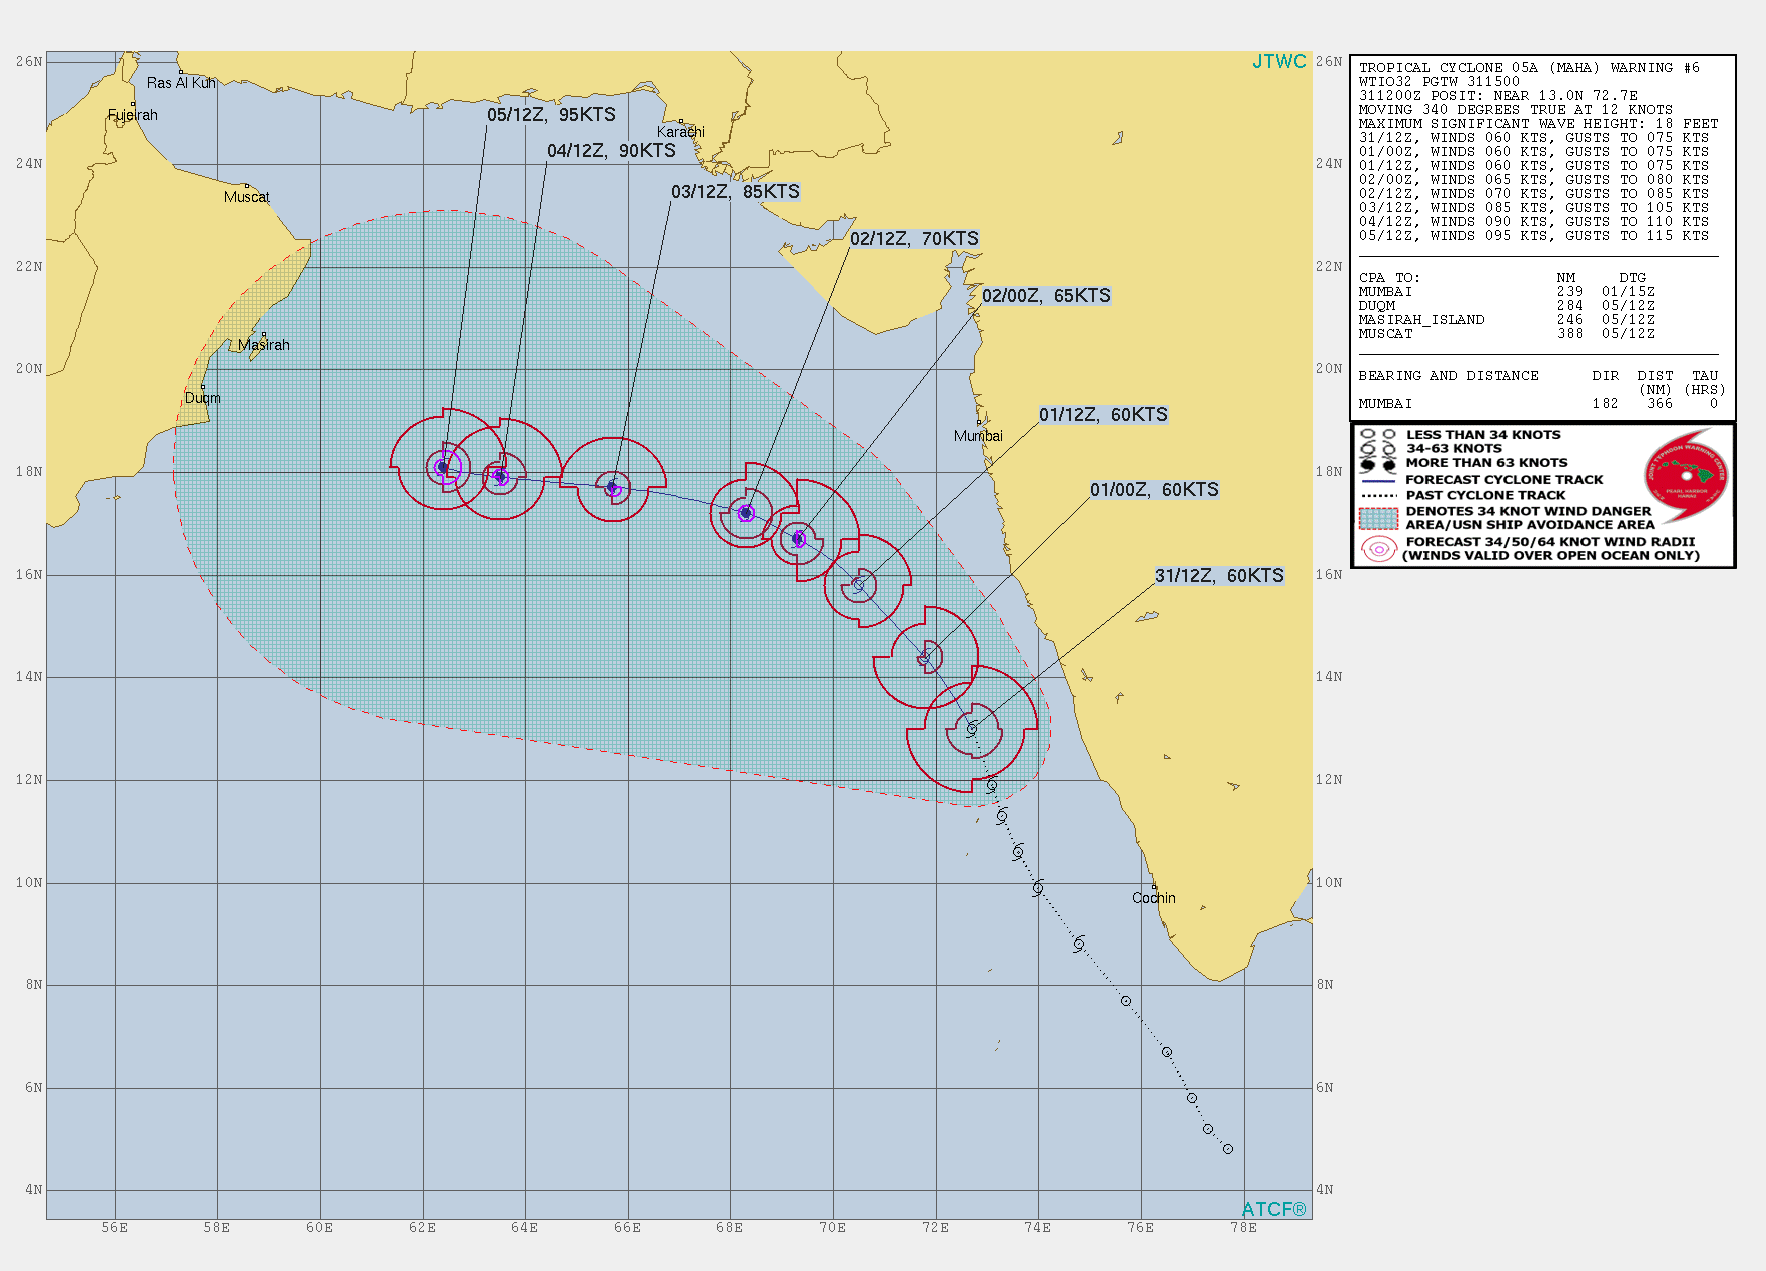 TC 05A: INTENSITY IS FORECAST TO INCREASE STEADILY AFTER 24H